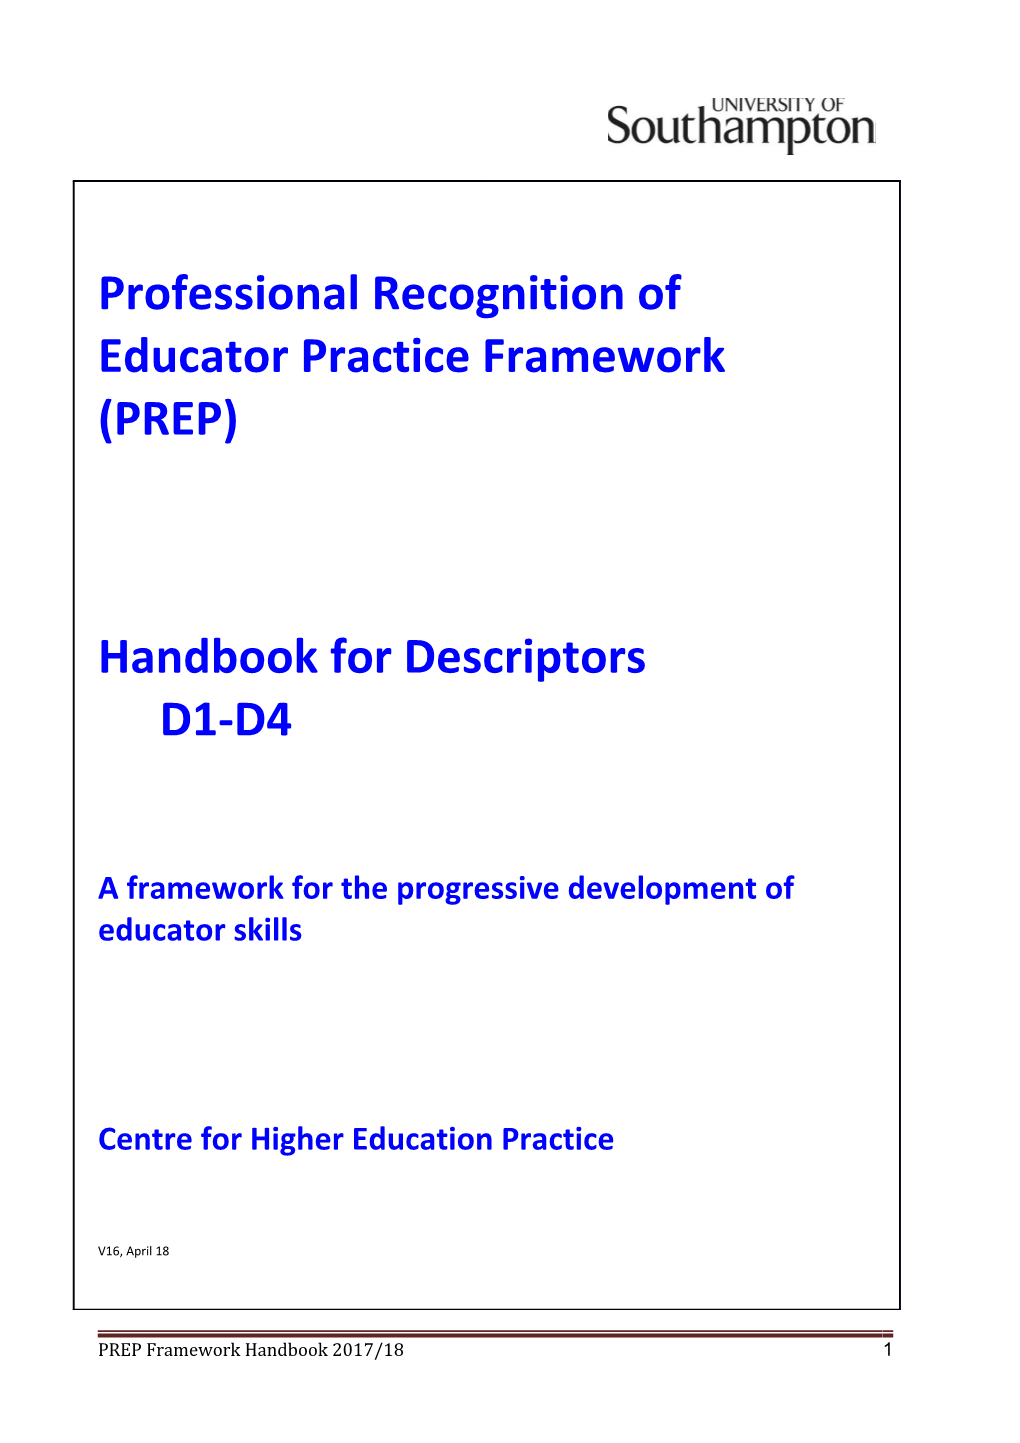 2) What Is the PREP Framework?